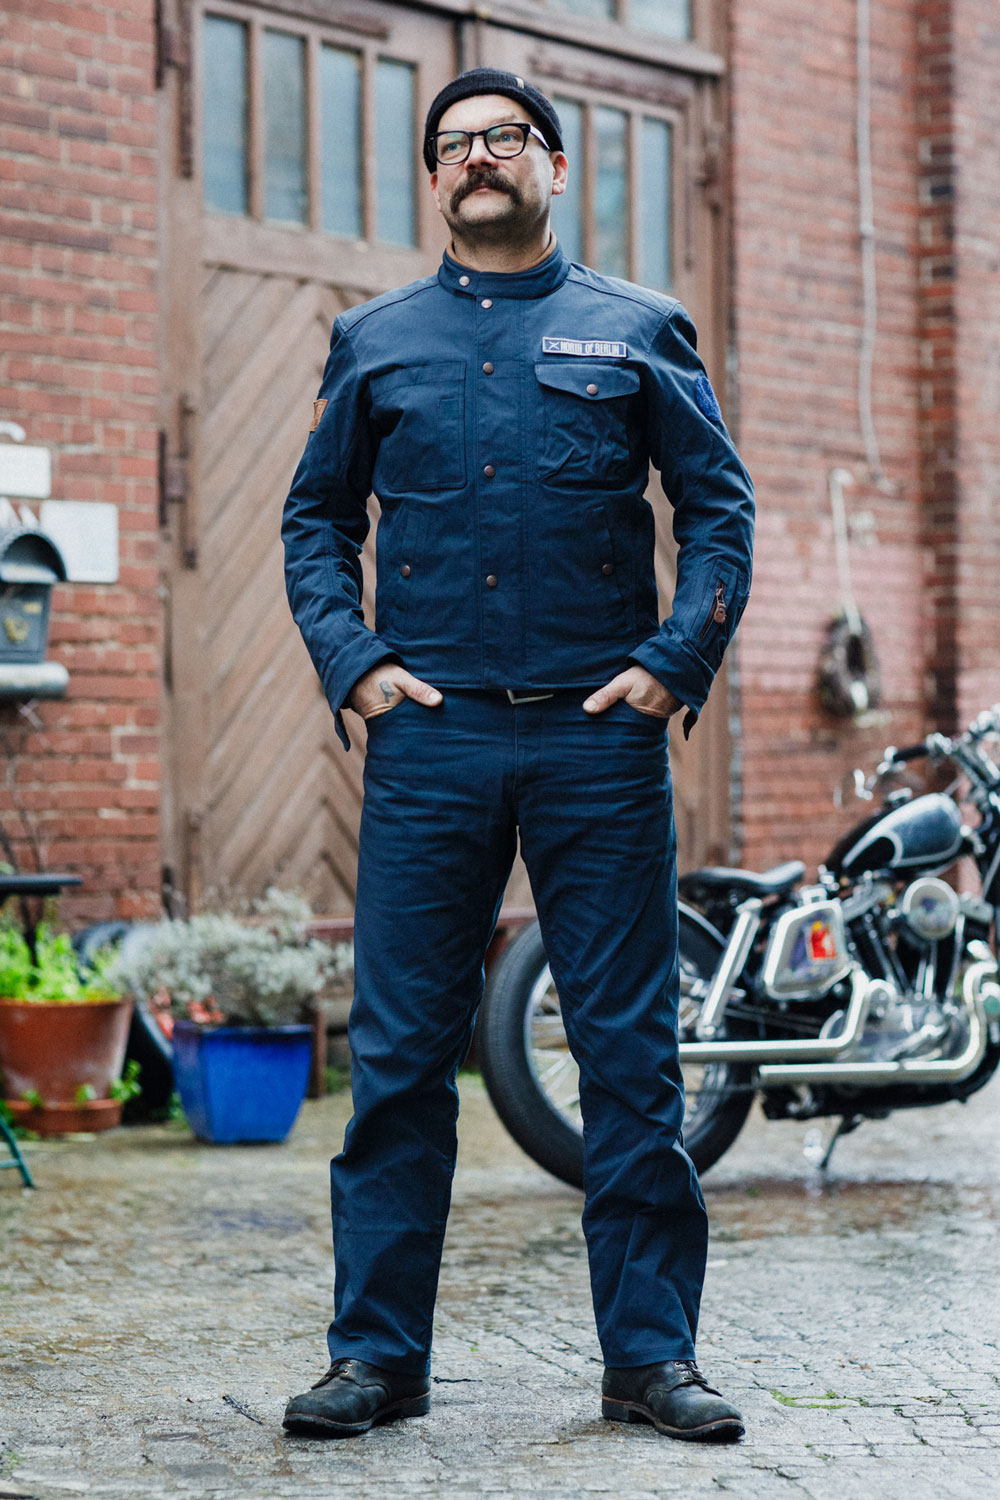 Dispatch Rider Jacket and Wingman Trousers